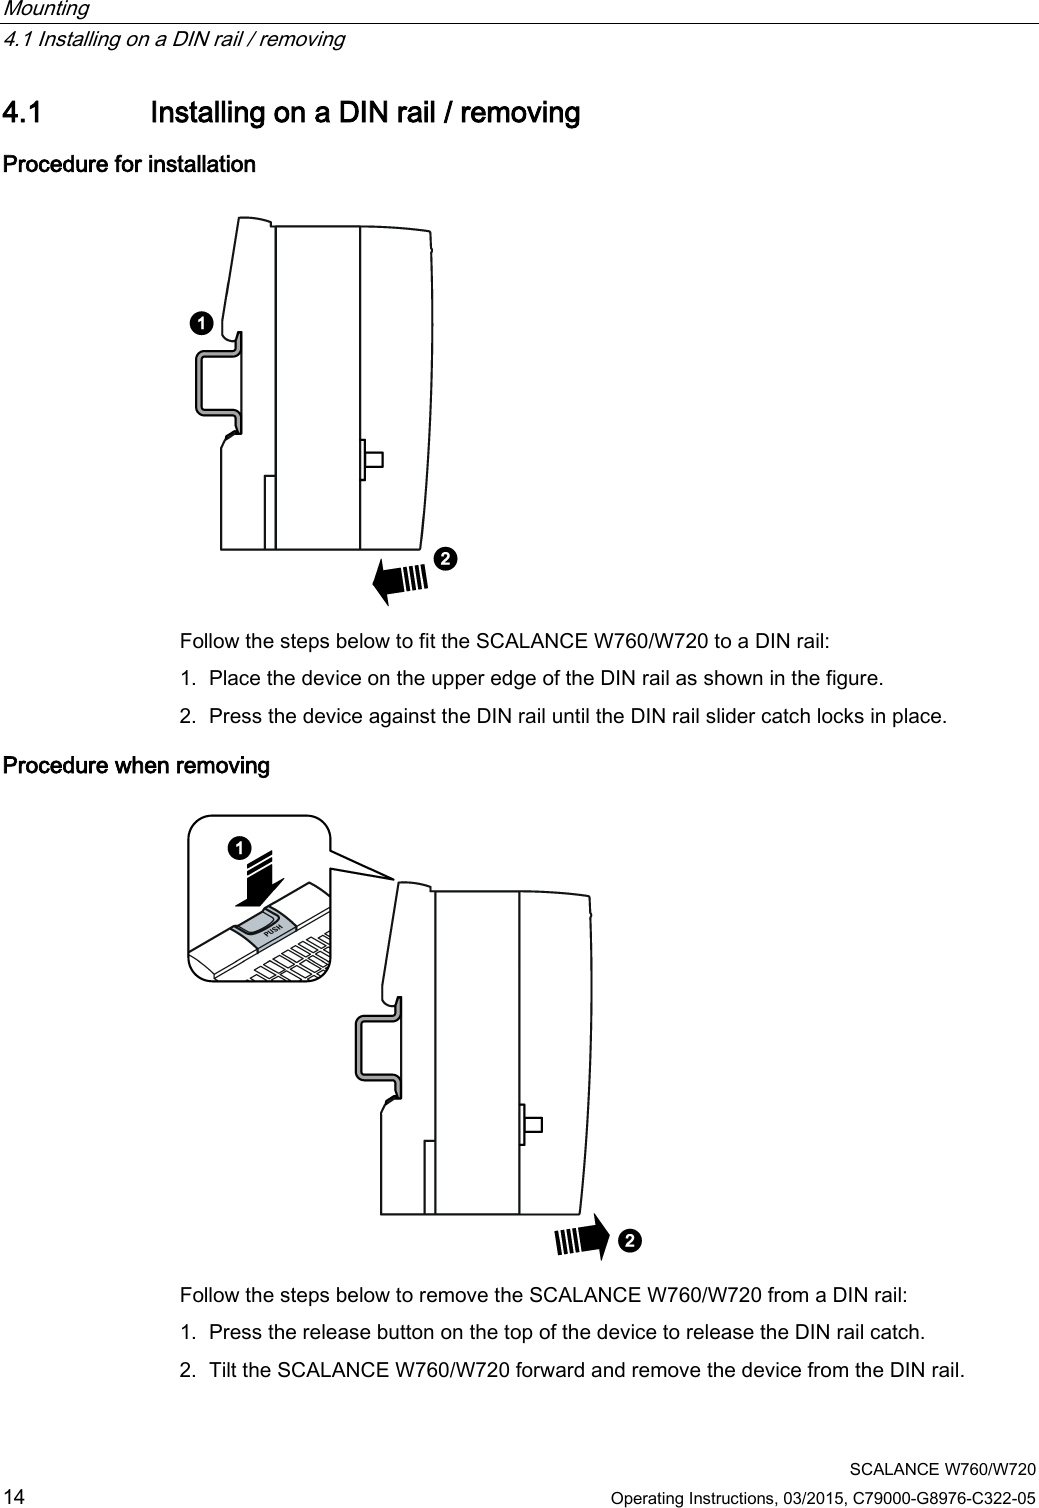 Mounting   4.1 Installing on a DIN rail / removing  SCALANCE W760/W720 14 Operating Instructions, 03/2015, C79000-G8976-C322-05 4.1 Installing on a DIN rail / removing Procedure for installation  Follow the steps below to fit the SCALANCE W760/W720 to a DIN rail: 1. Place the device on the upper edge of the DIN rail as shown in the figure. 2. Press the device against the DIN rail until the DIN rail slider catch locks in place. Procedure when removing  Follow the steps below to remove the SCALANCE W760/W720 from a DIN rail: 1. Press the release button on the top of the device to release the DIN rail catch. 2. Tilt the SCALANCE W760/W720 forward and remove the device from the DIN rail. 